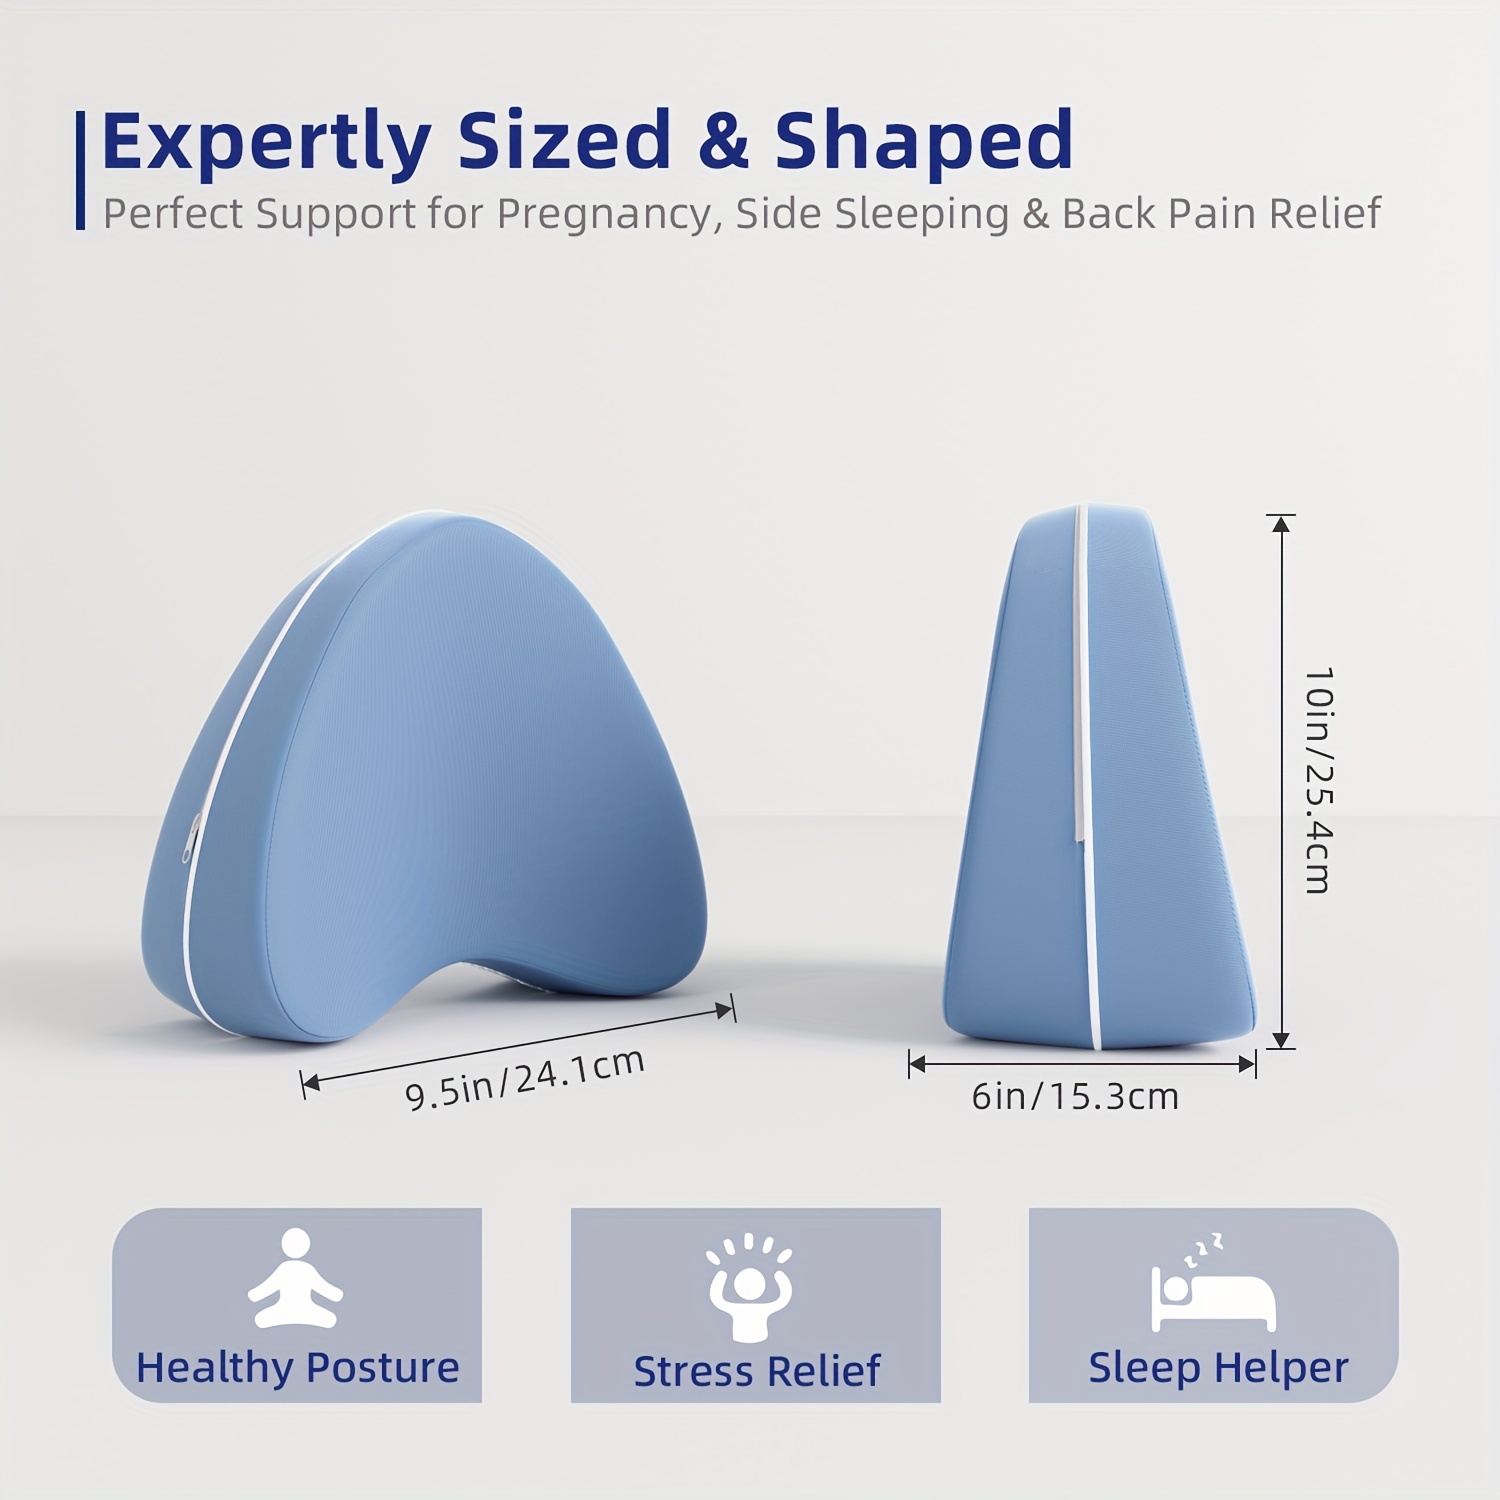 Ice Silk Fabric Legacy Leg & Knee Pillow For Side Sleepers